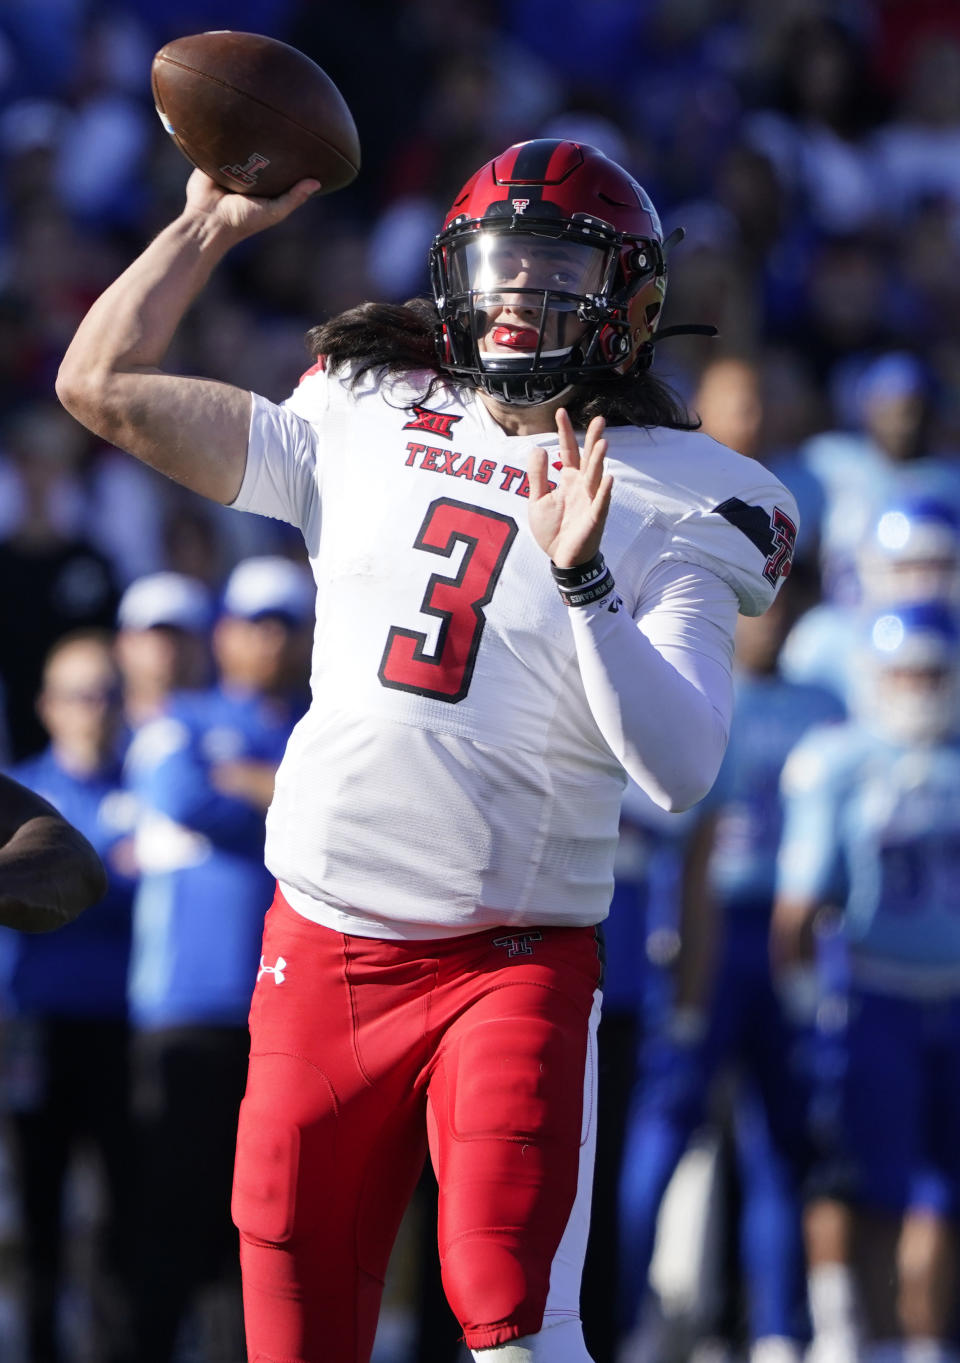 Texas Tech quarterback Henry Colombi (3) looks to pass against Kansas during the first quarter of an NCAA college football game Saturday, Oct. 16, 2021, in Lawrence, Kan. (AP Photo/Ed Zurga)